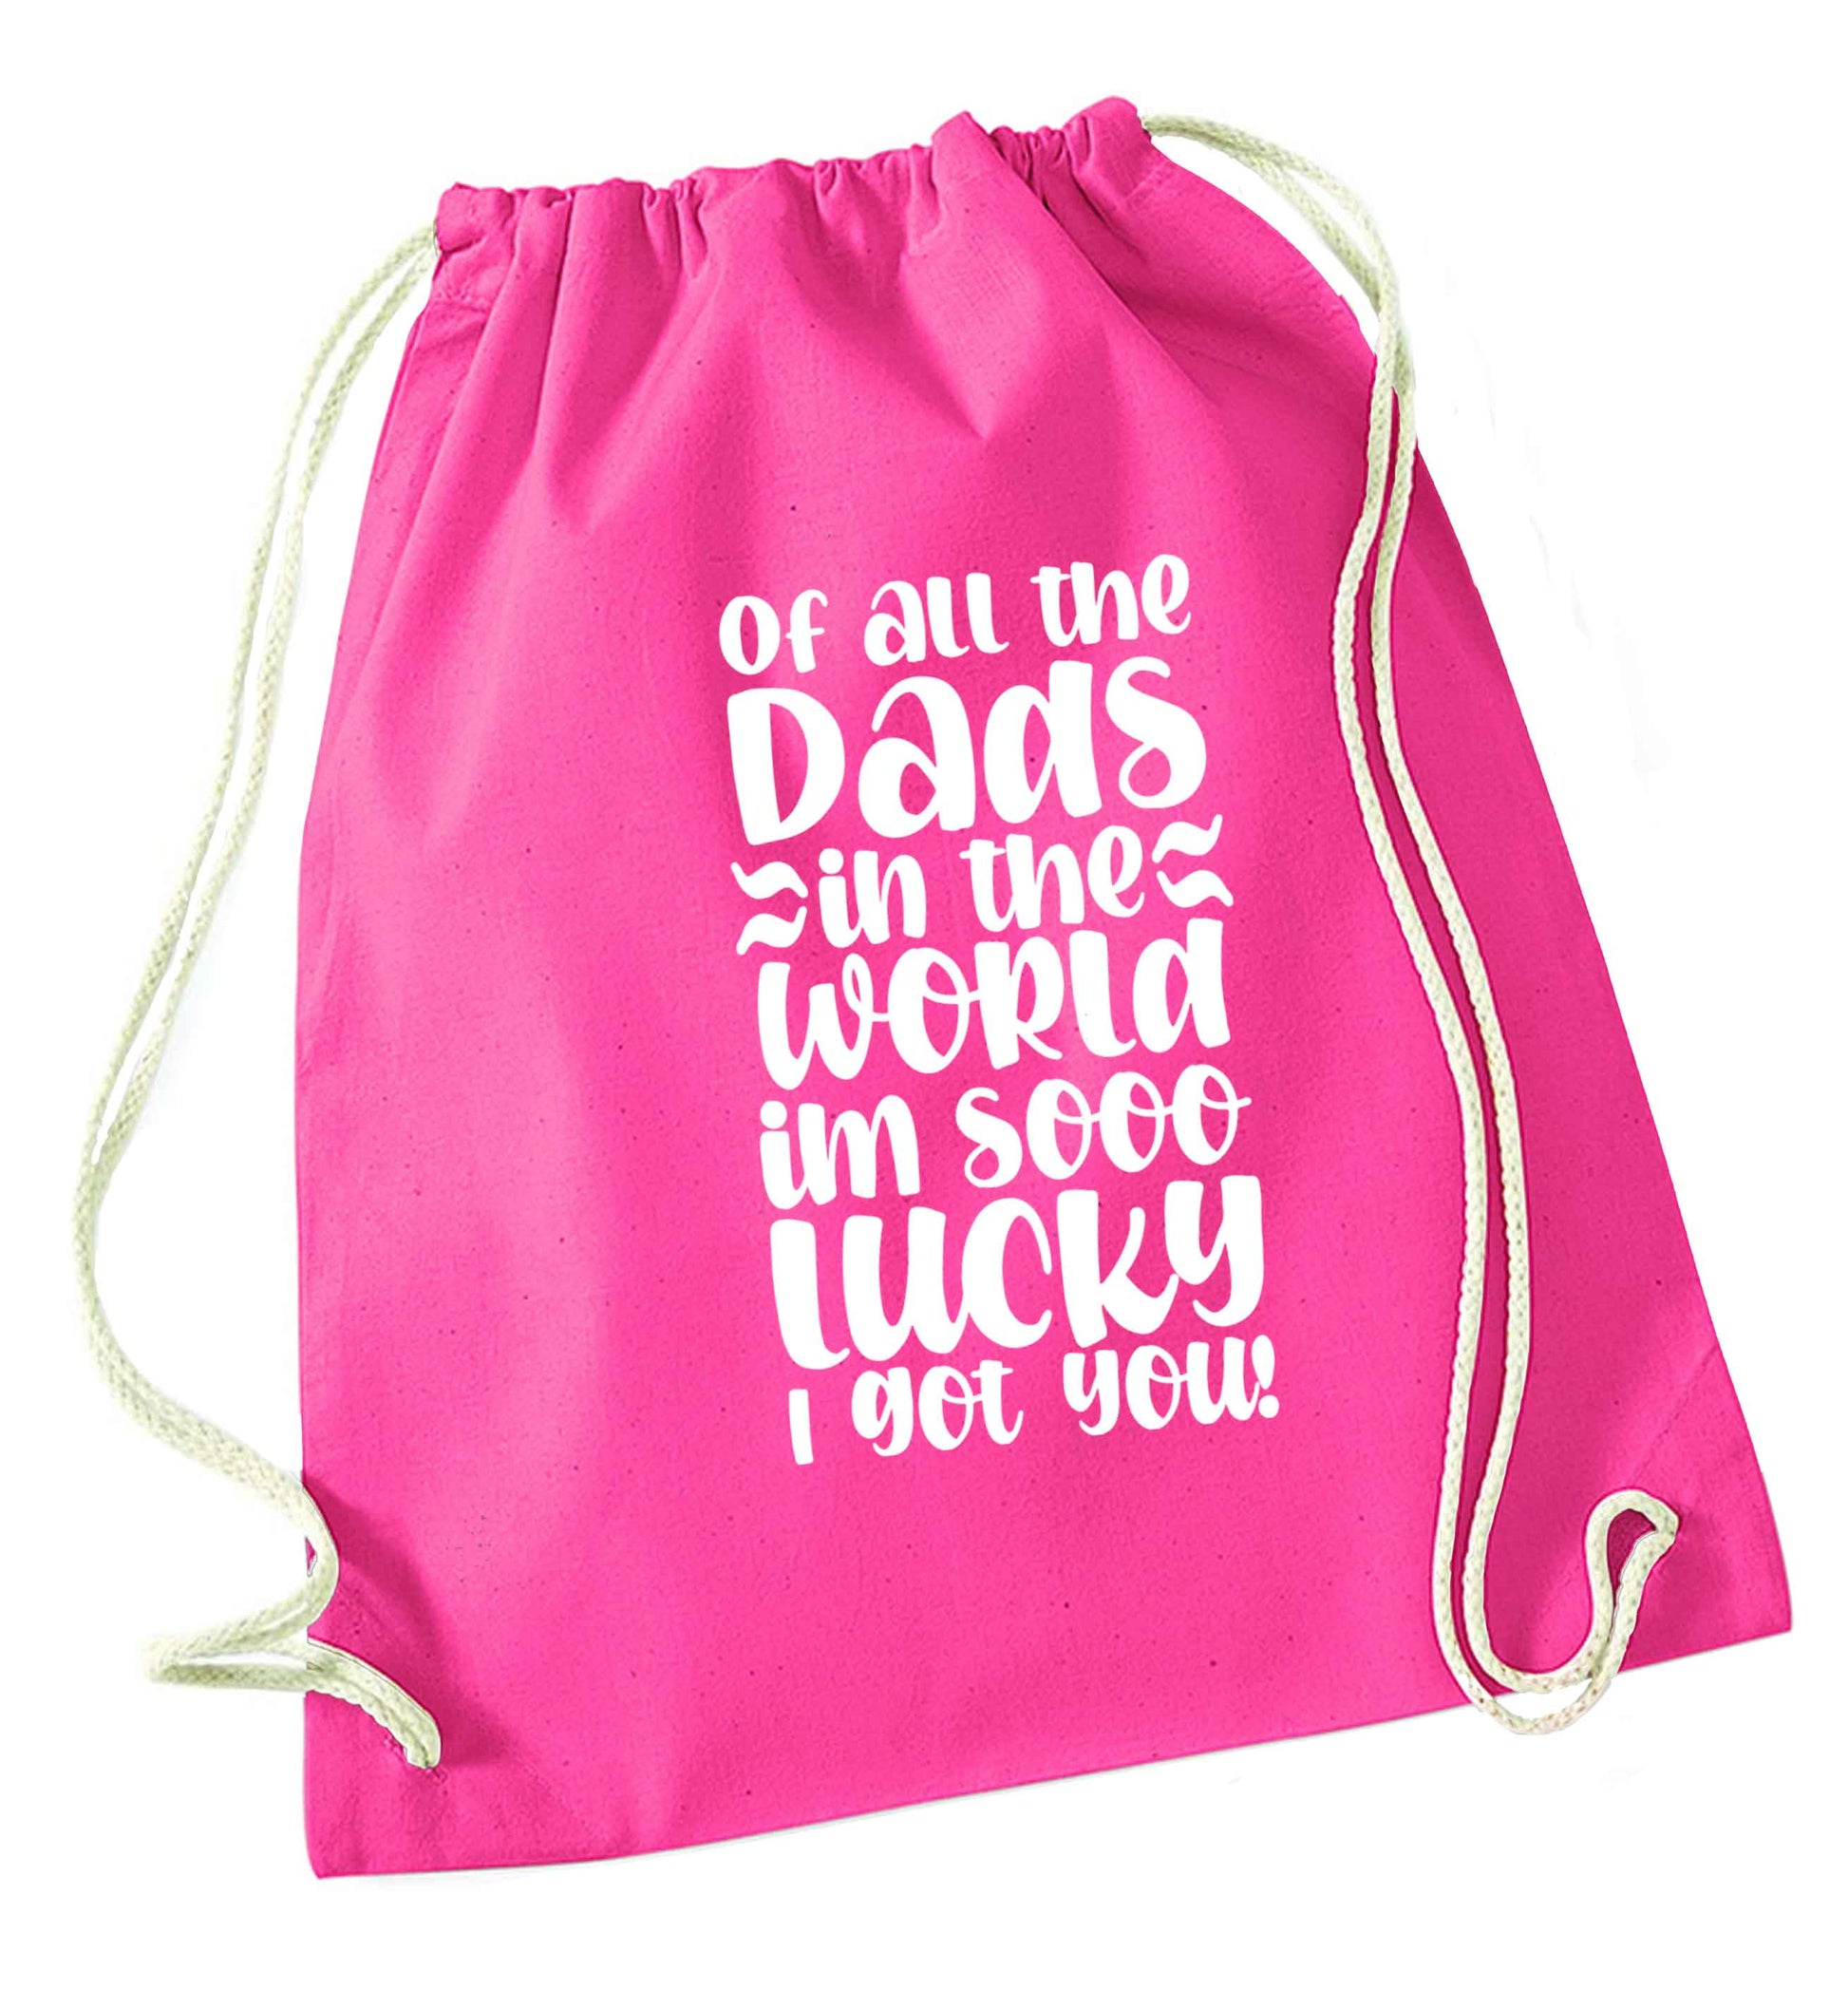 Of all the Dads in the world I'm so lucky I got you pink drawstring bag